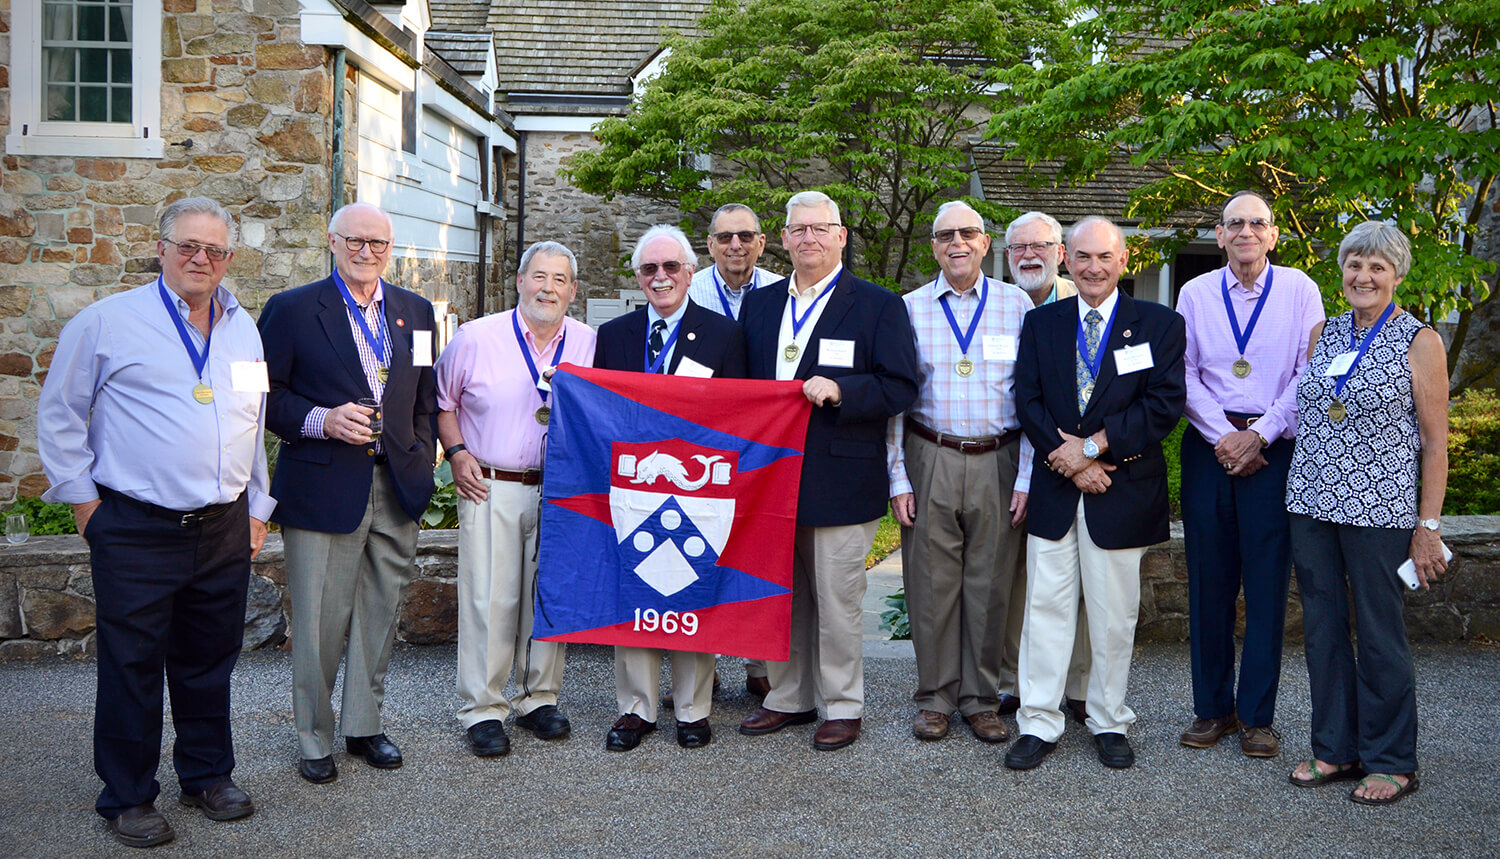 The Class of 1969 celebrates their 50th reunion